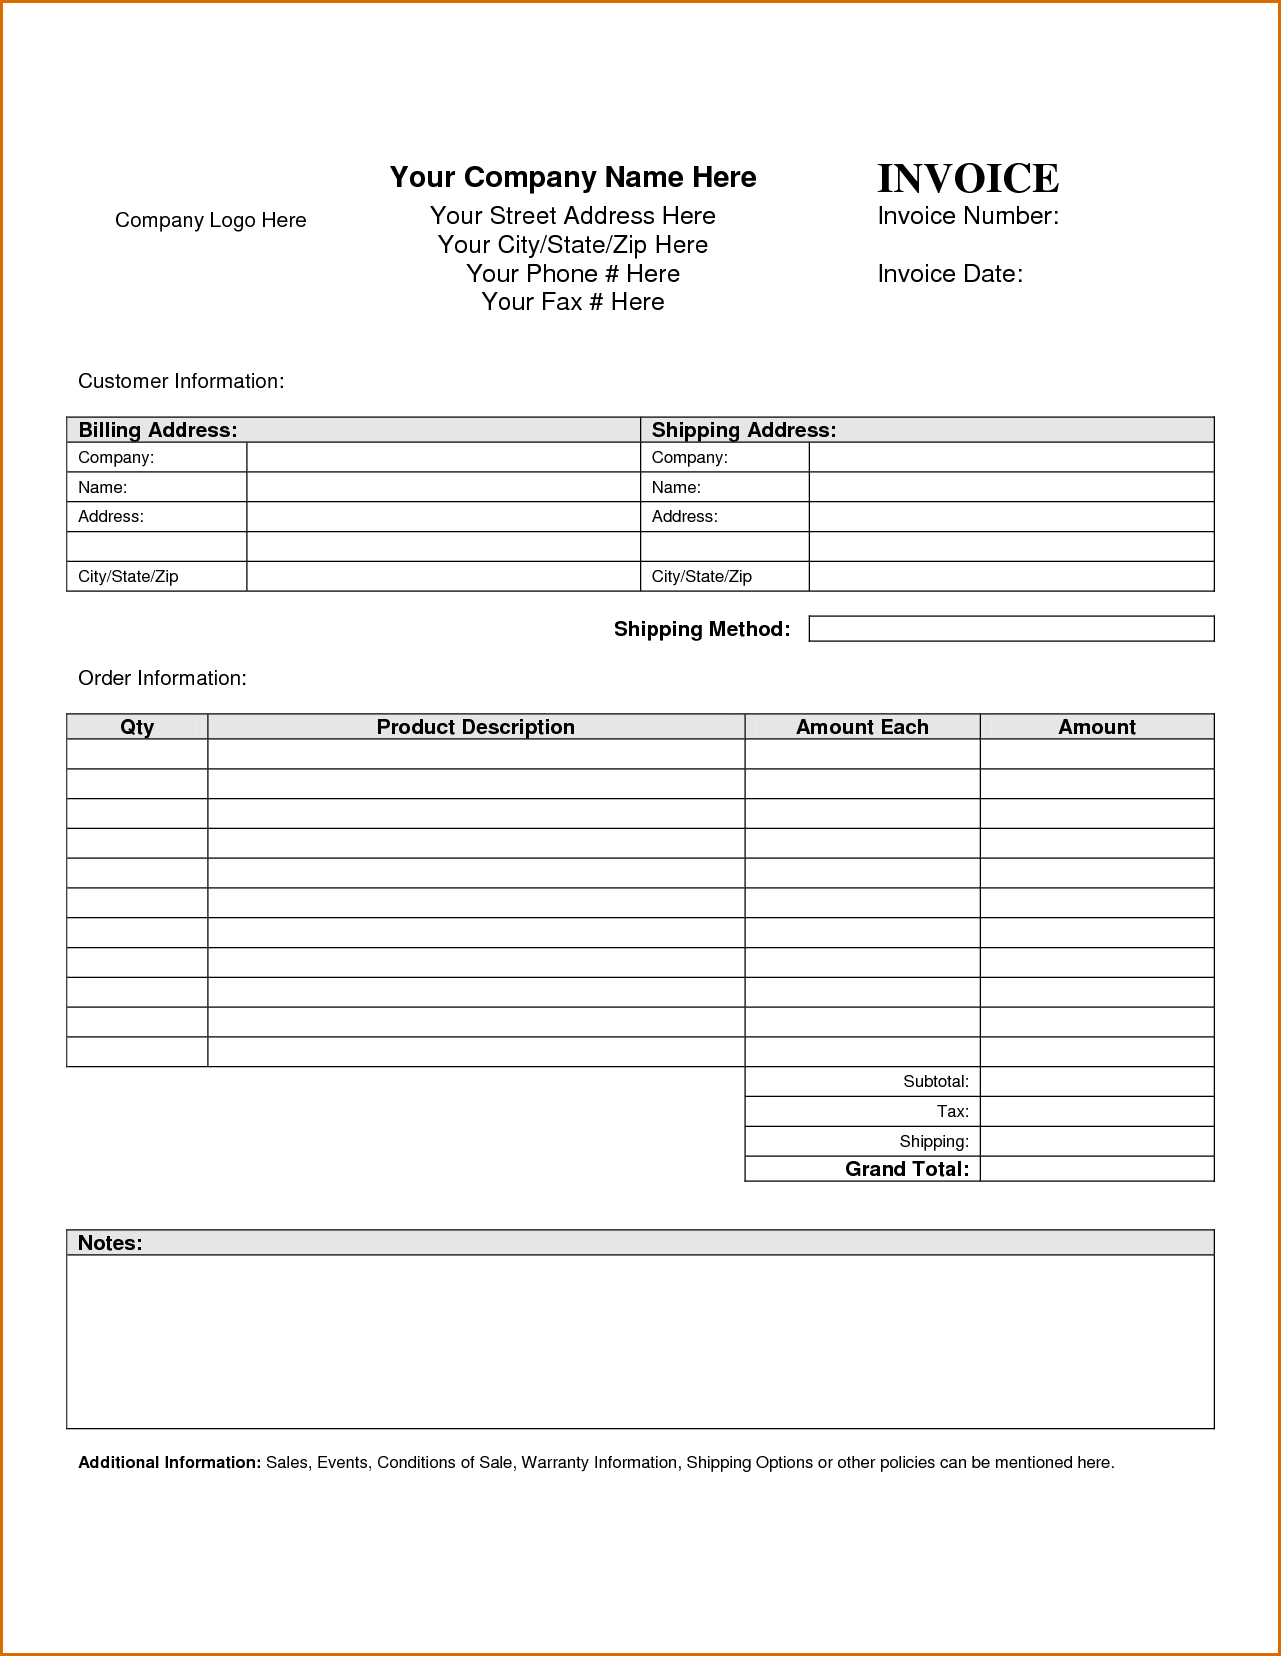 81 Blank Parts And Labor Invoice Template Free in Word with Parts And Labor Invoice Template Free